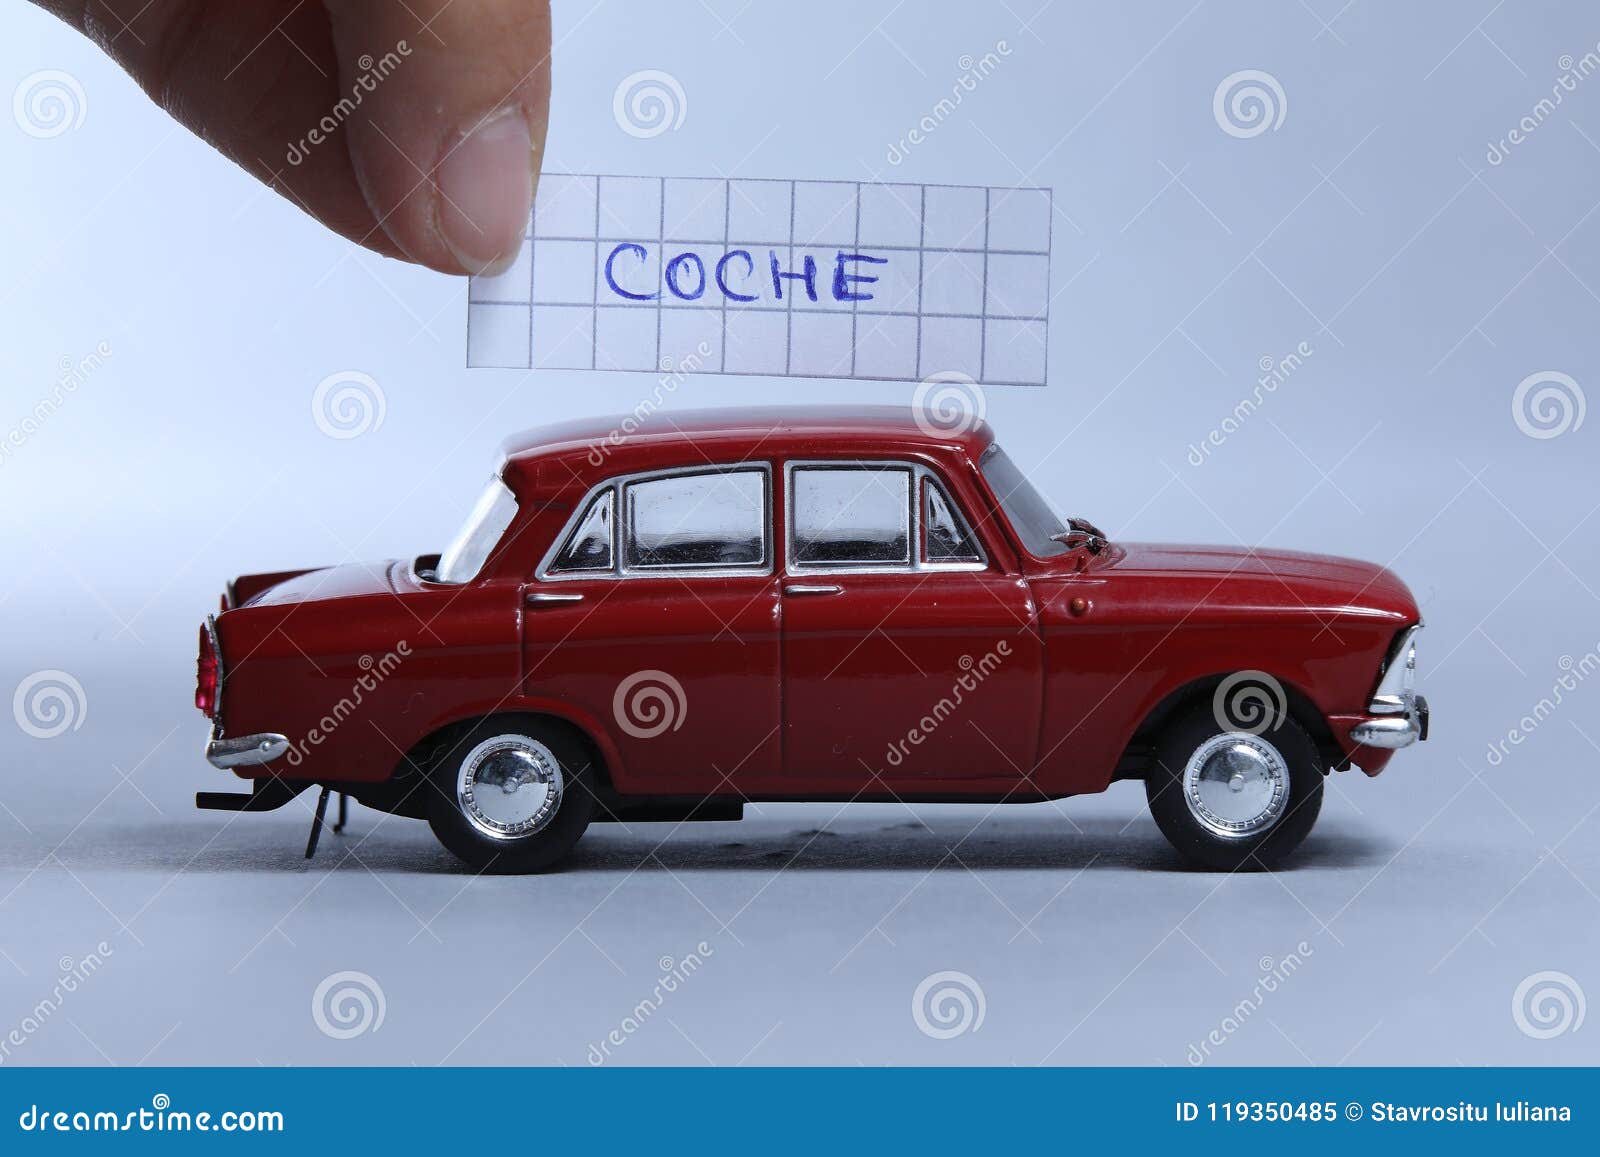 auto word written on a piece of paper, coche in spanish